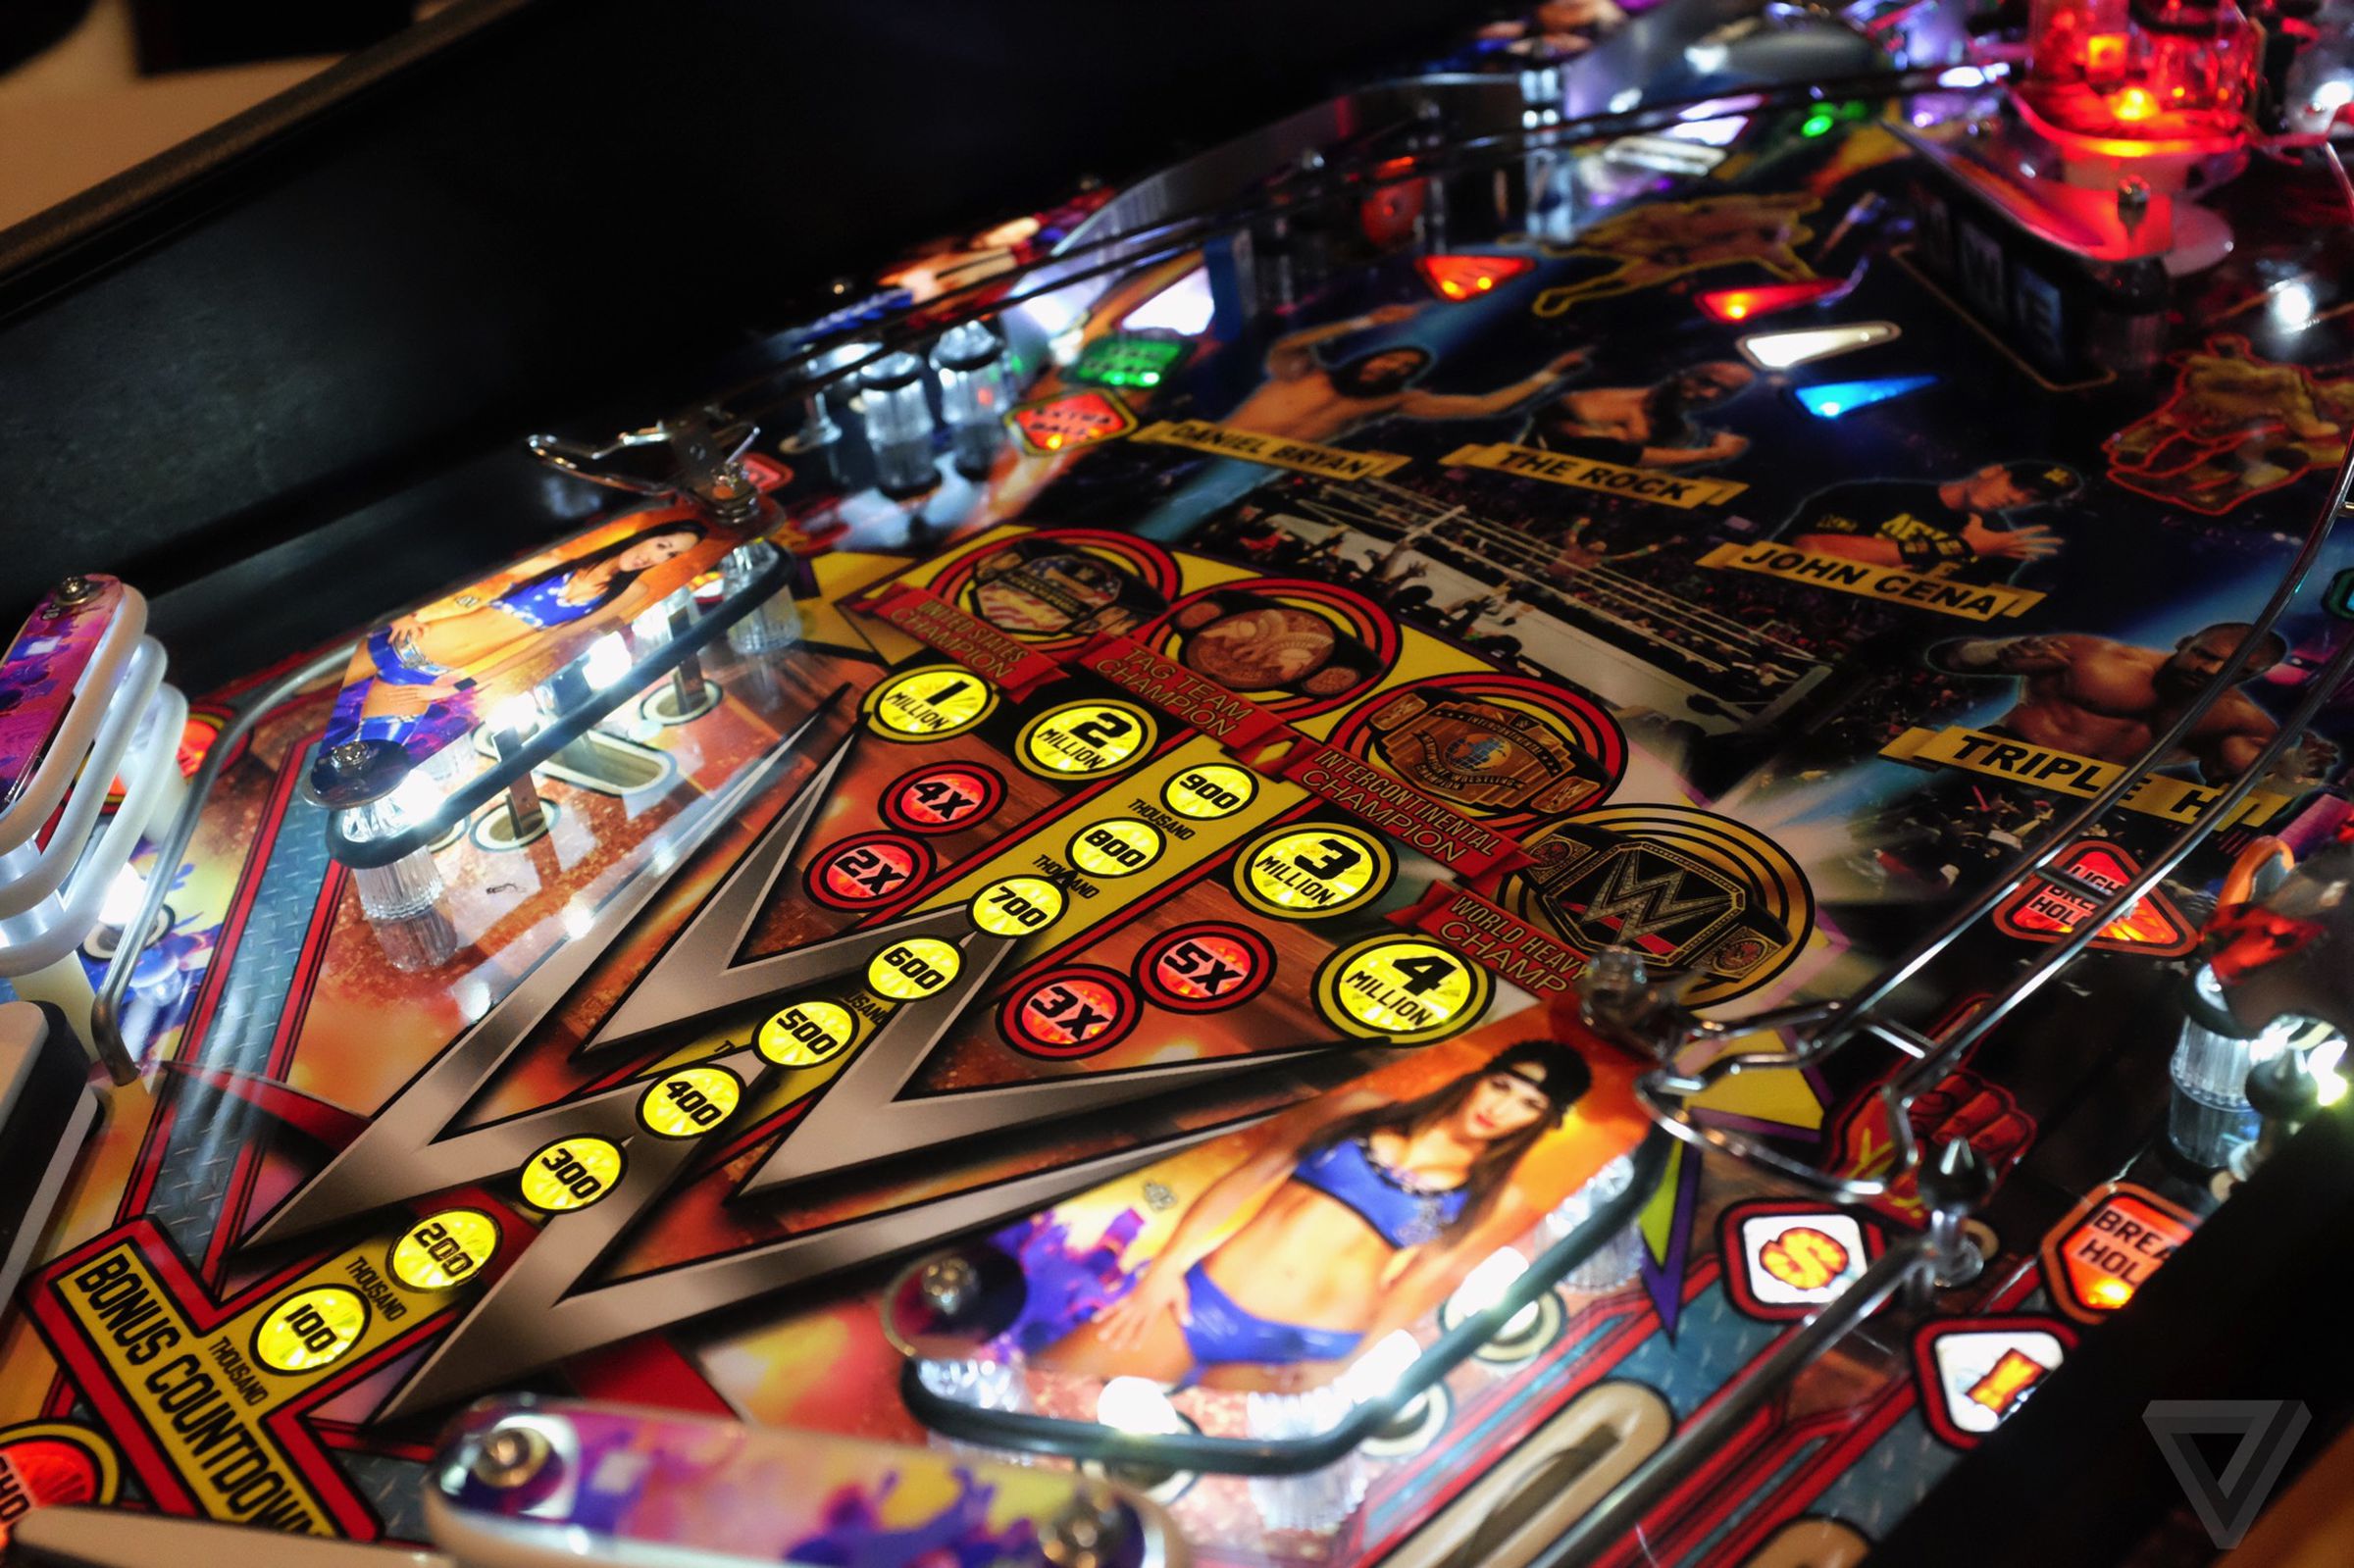 Stern's Wrestlemania pinball table at CES 2015